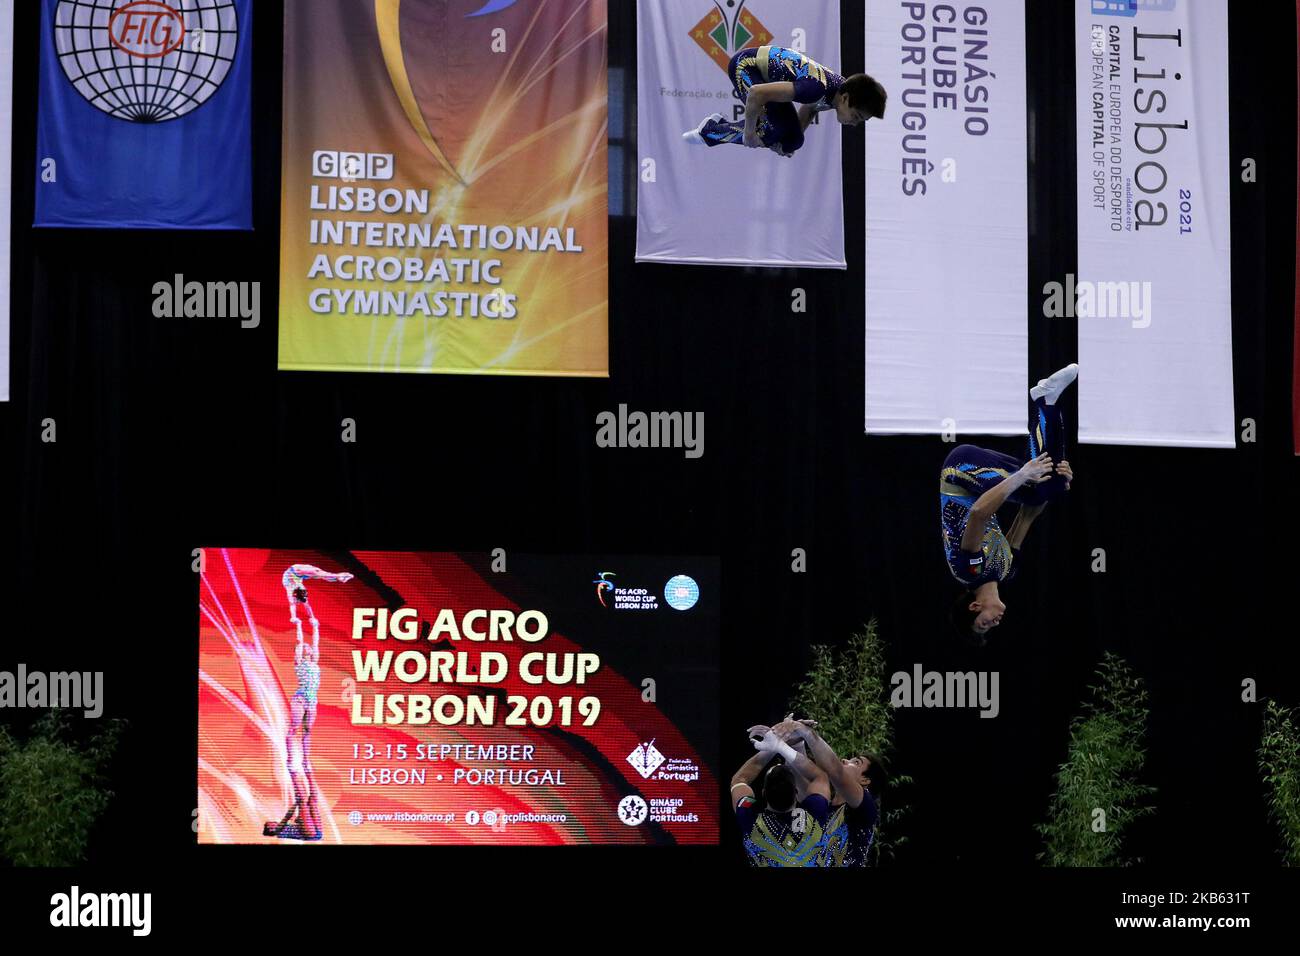 Men's group Henrique Piqueiro, Frederico Silva, Henrique Silva and Miguel Silvain of Portugal in action during the FIG Acro World Cup 2019 - Acrobatic Gymnastics Finals at the Casal Vistoso Hall in Lisbon, Portugal on September 15, 2019. (Photo by Pedro FiÃºza/NurPhoto) Stock Photo